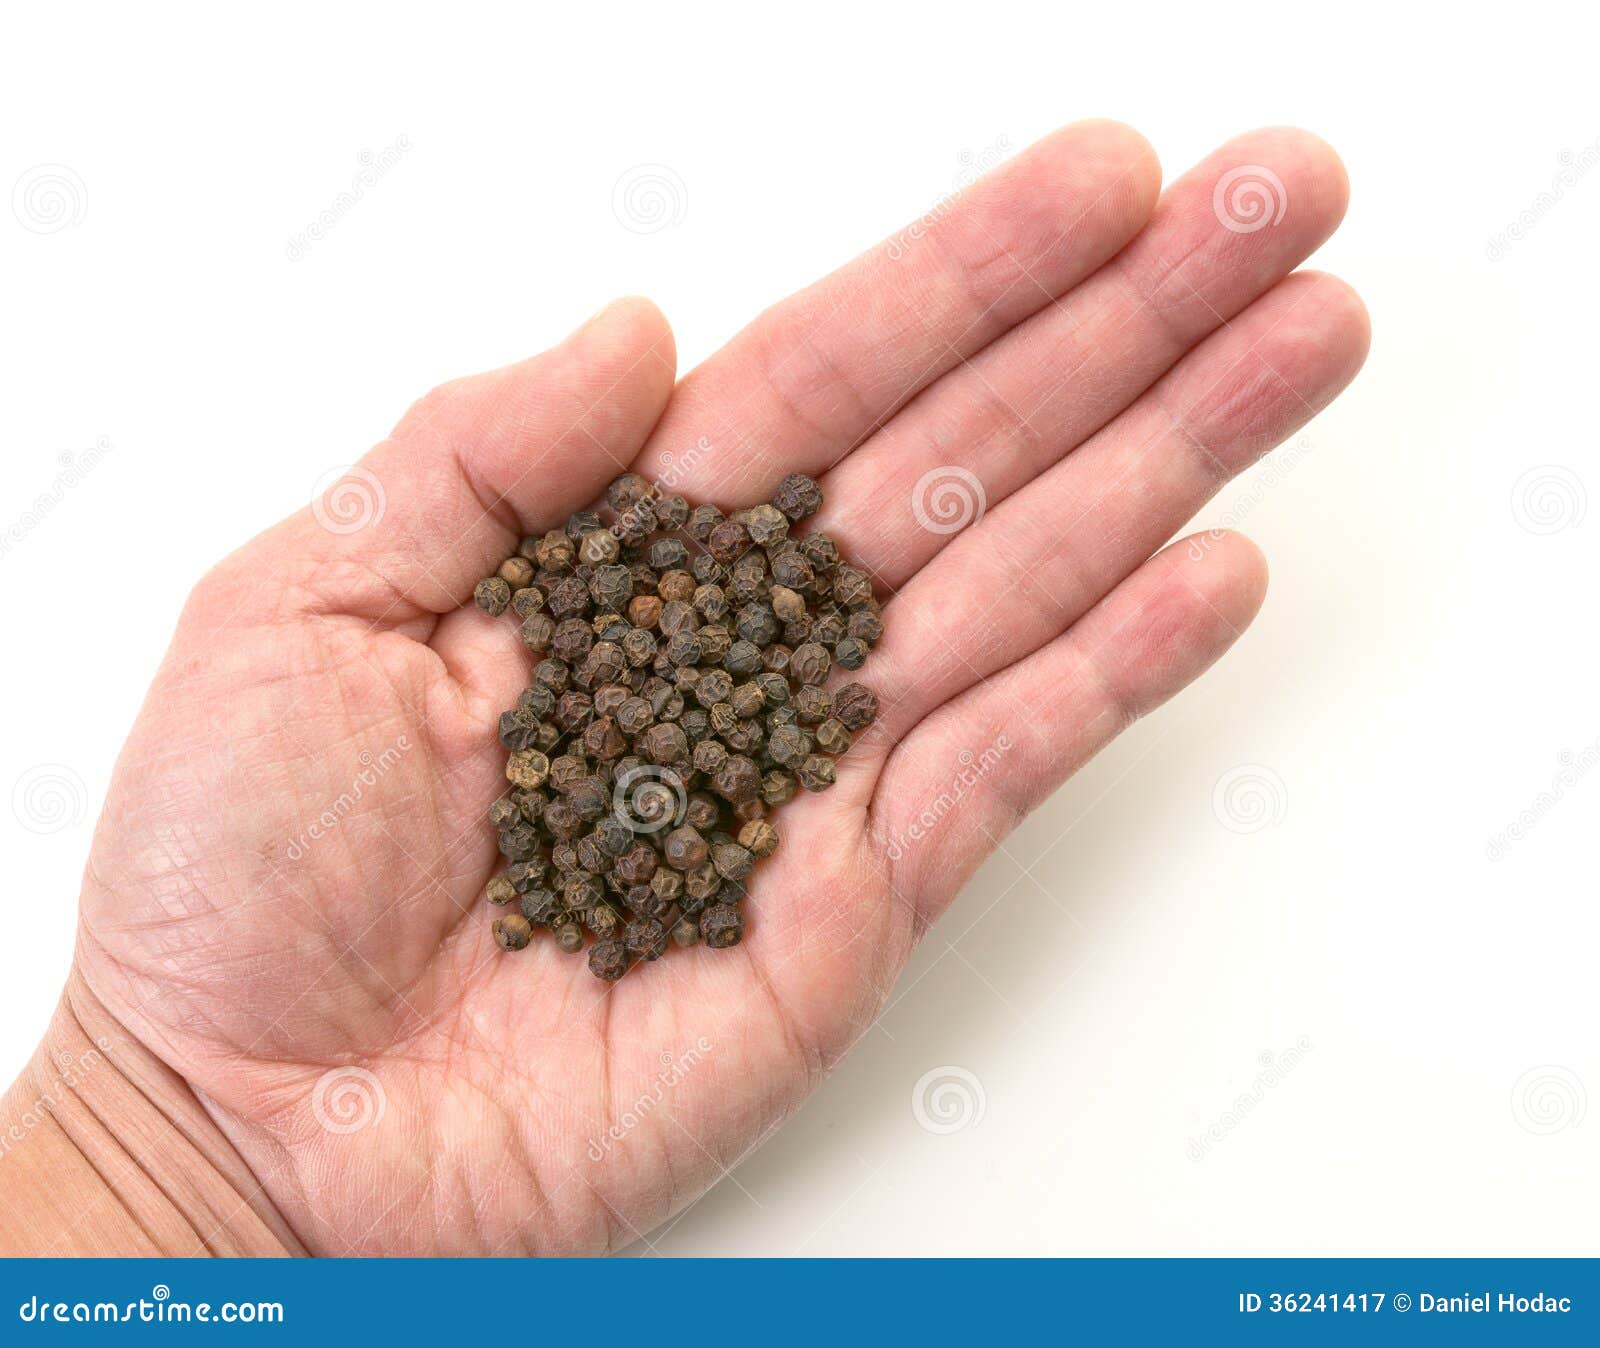 Hand Offering Whole Peppercorn Stock Image - Image of hand, corn: 36241417